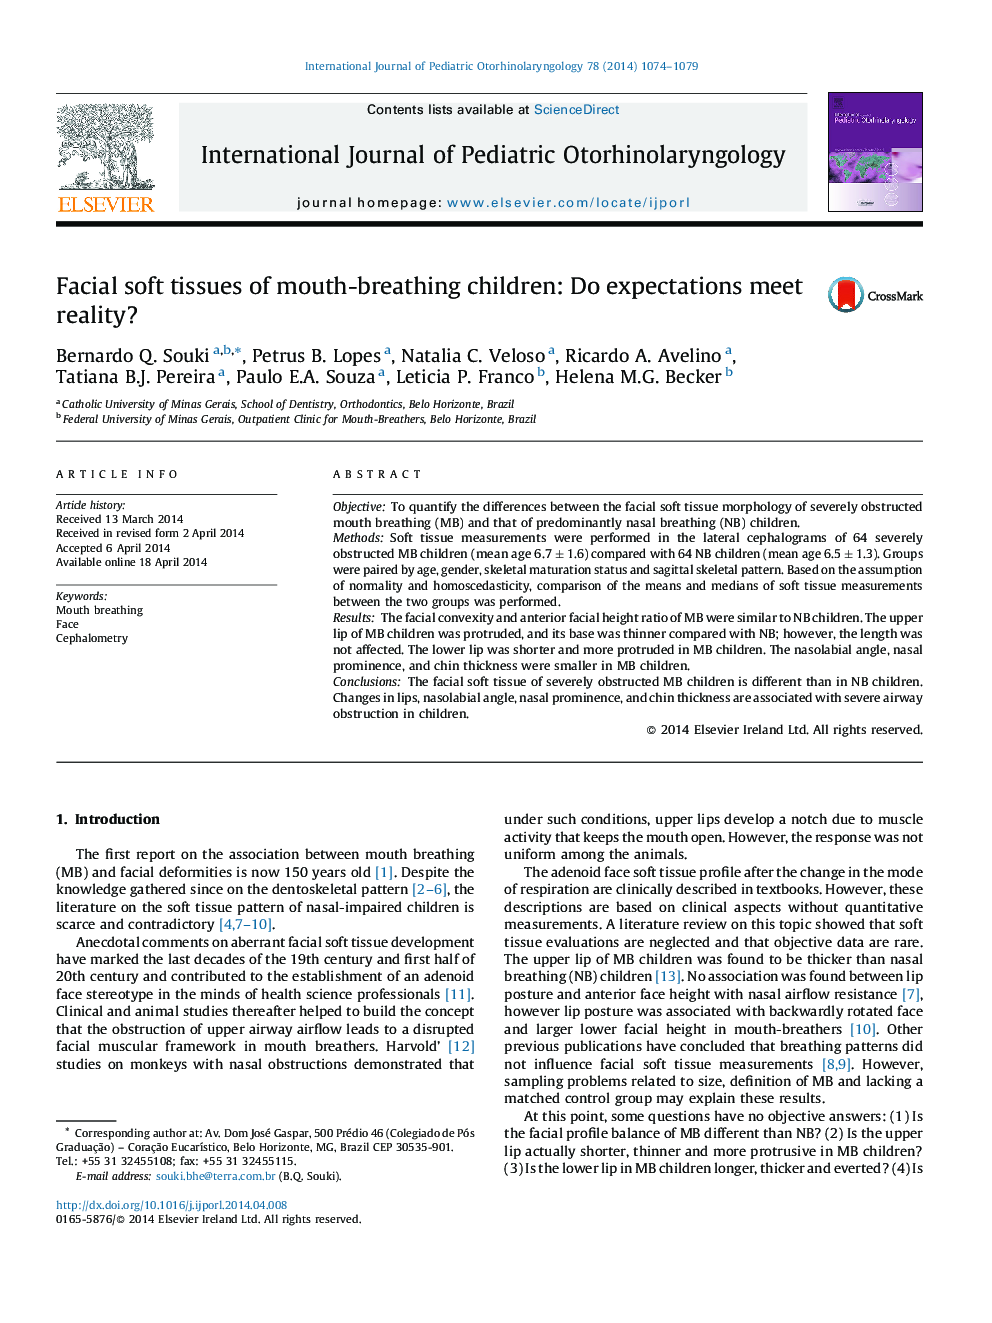 Facial soft tissues of mouth-breathing children: Do expectations meet reality?